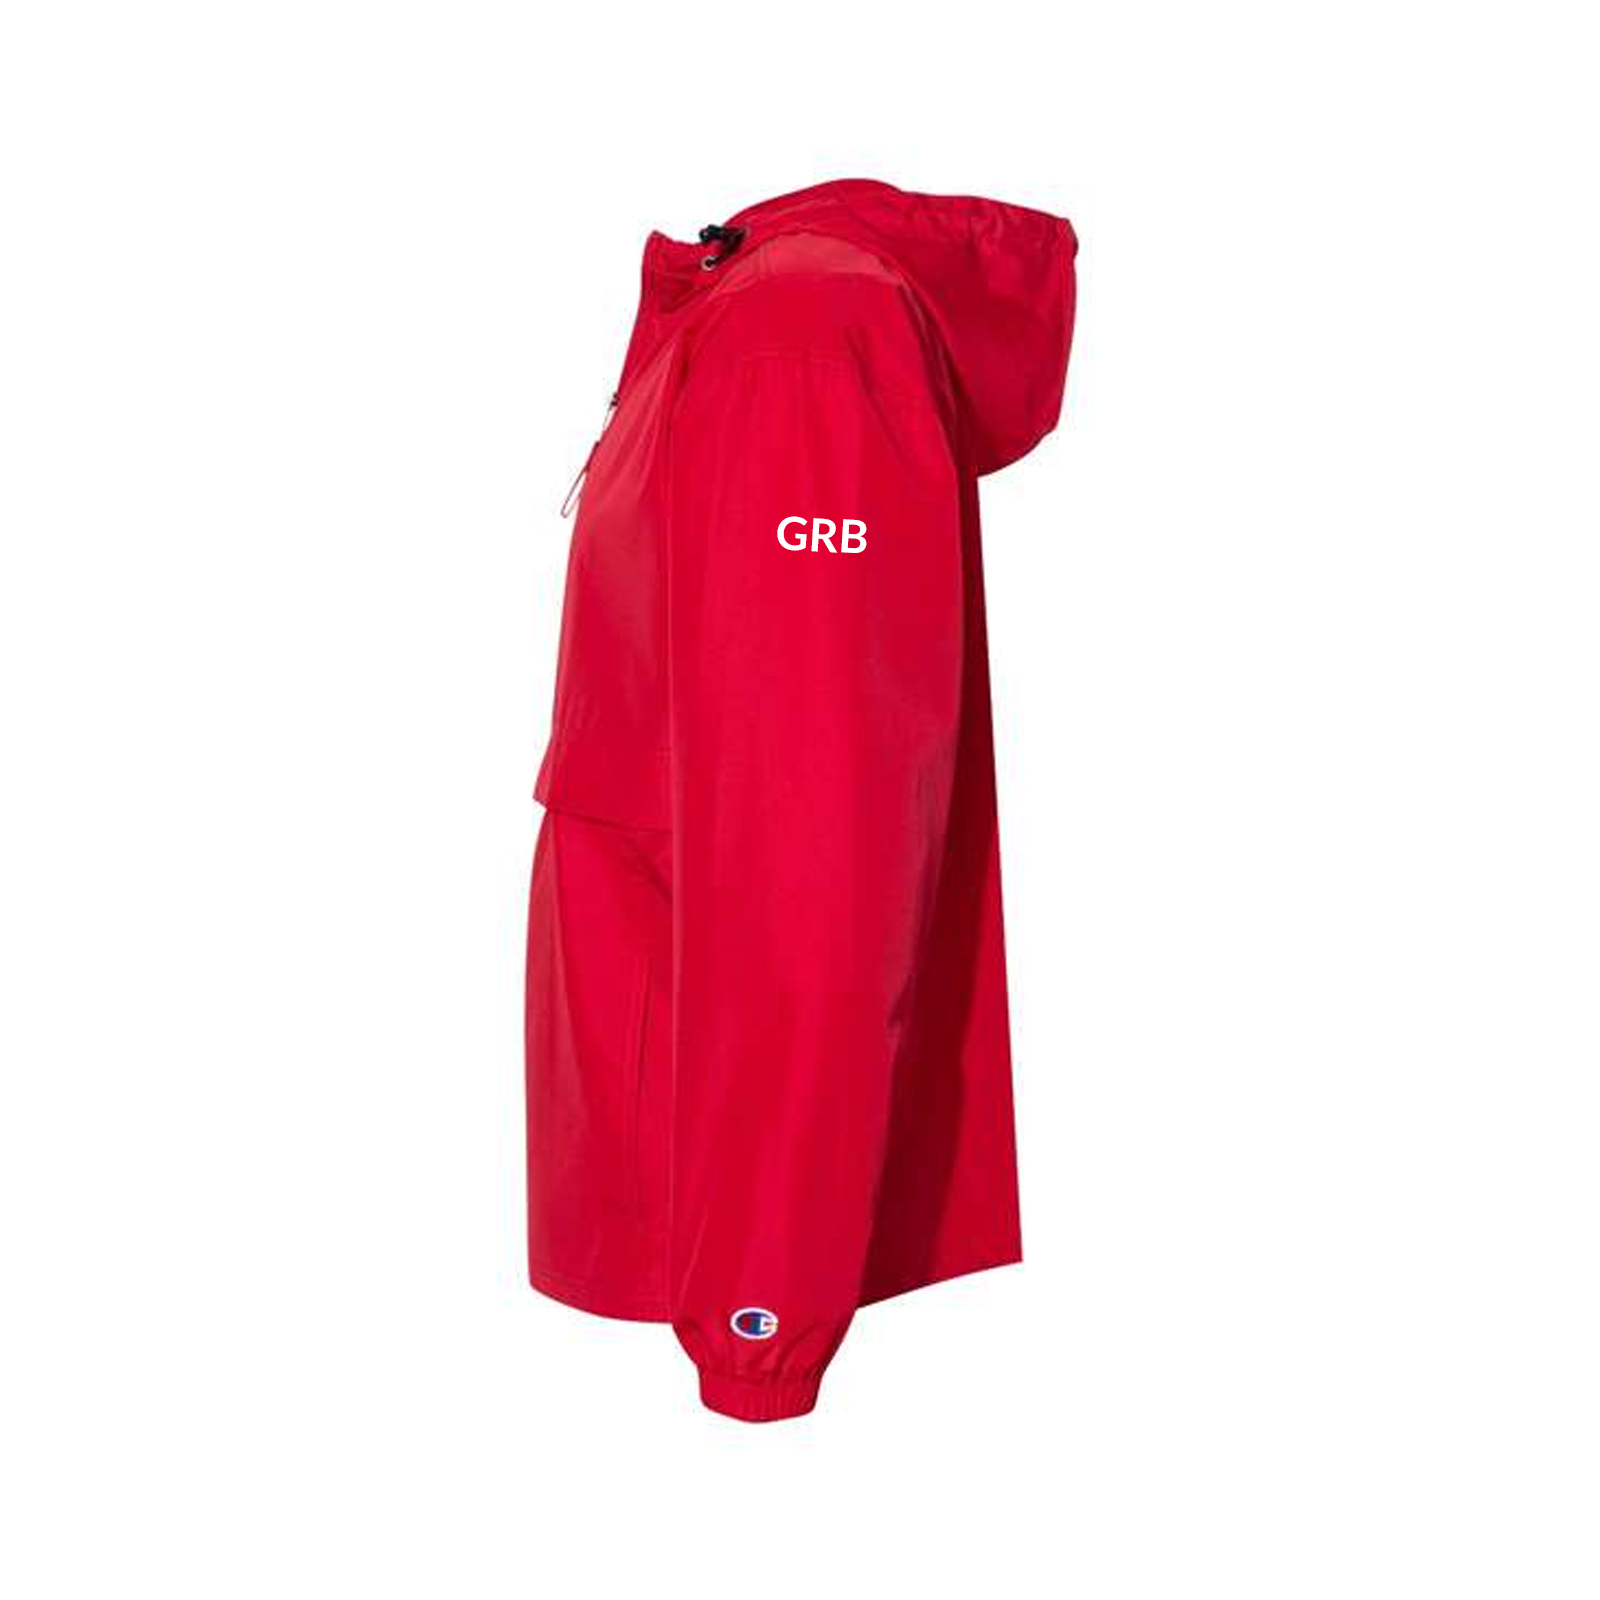 Champion CO200 - Packable Jacket